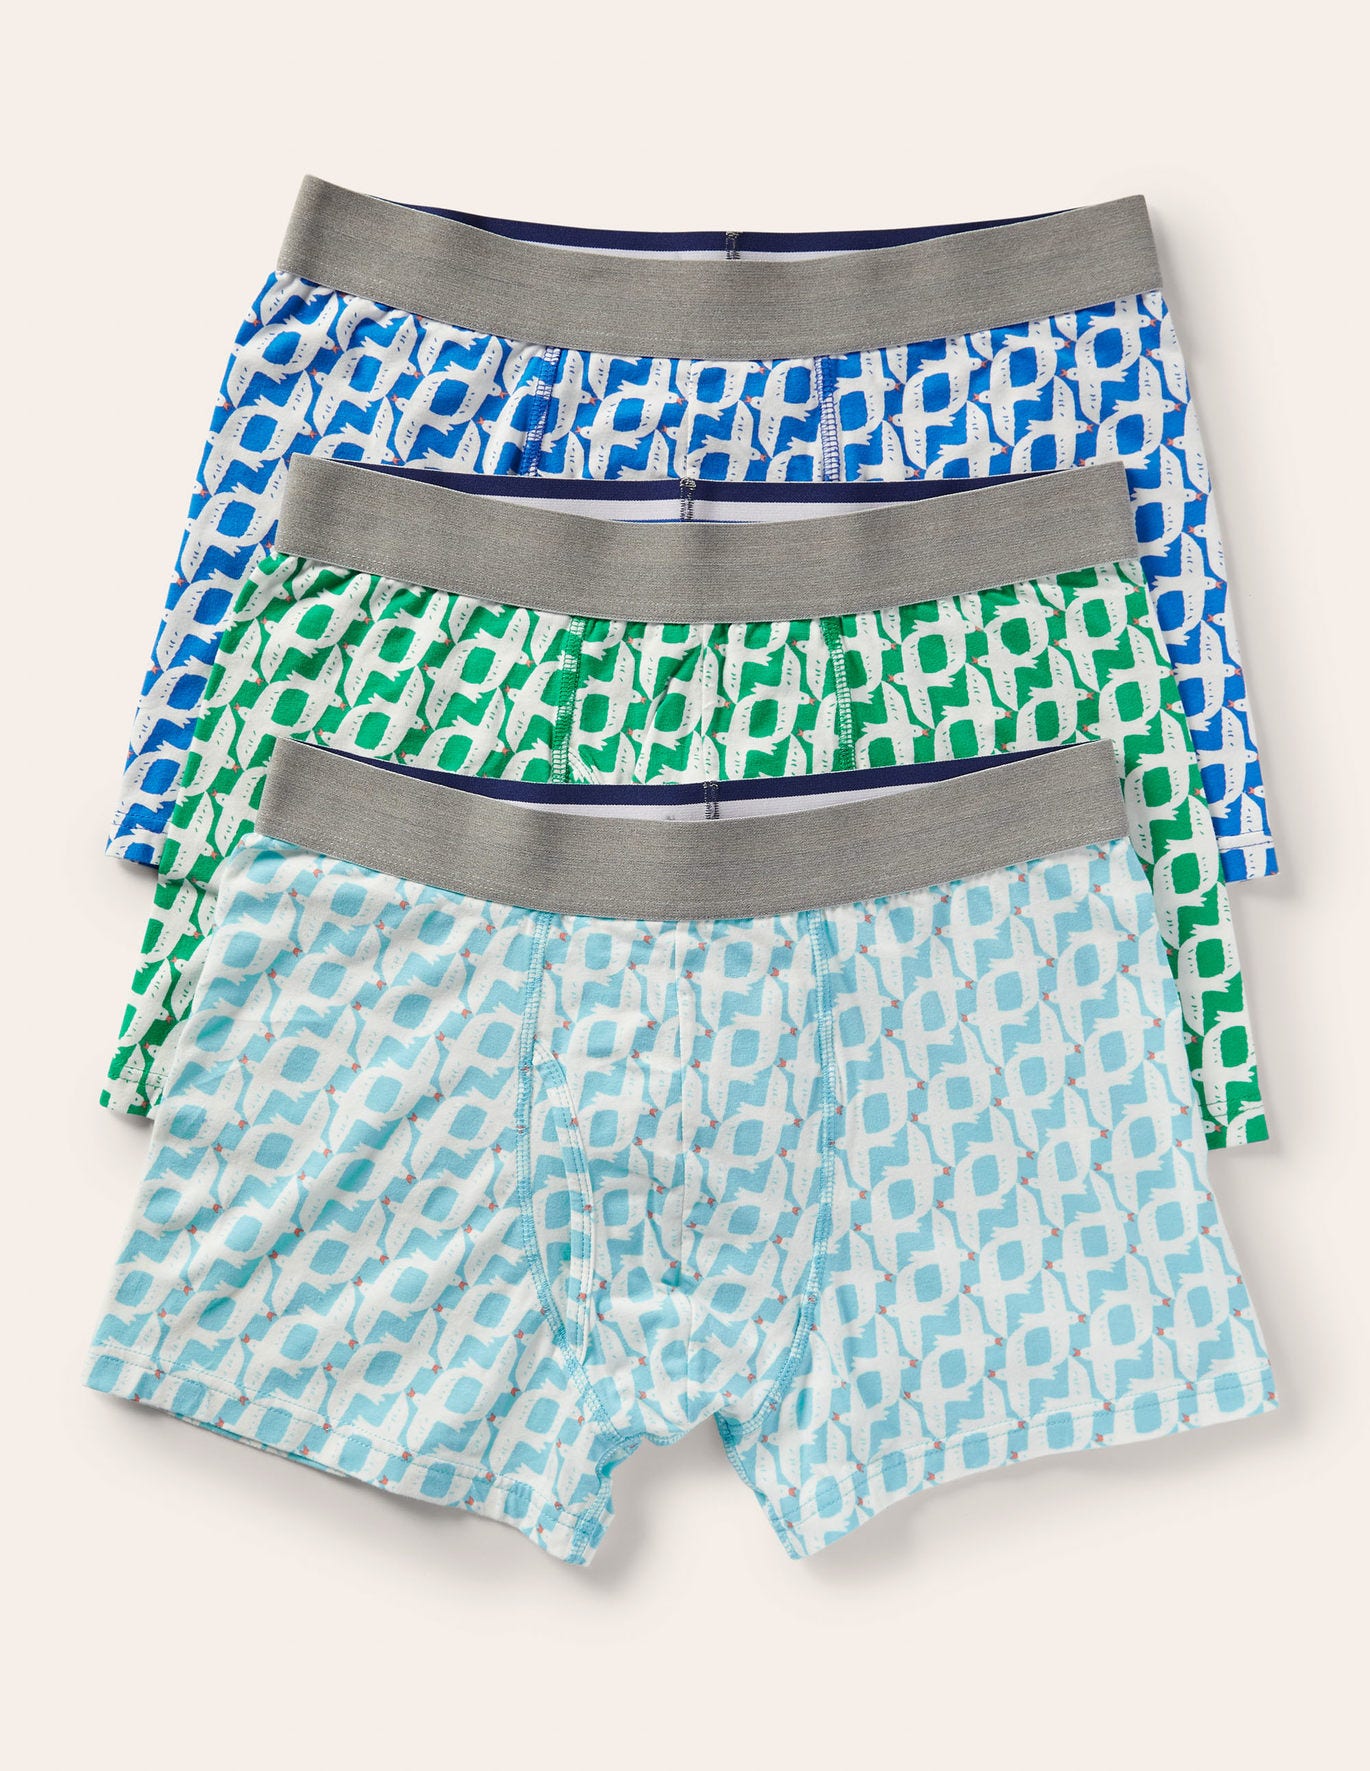 Boden 3 Pack Jersey Boxers - Seagulls Pack